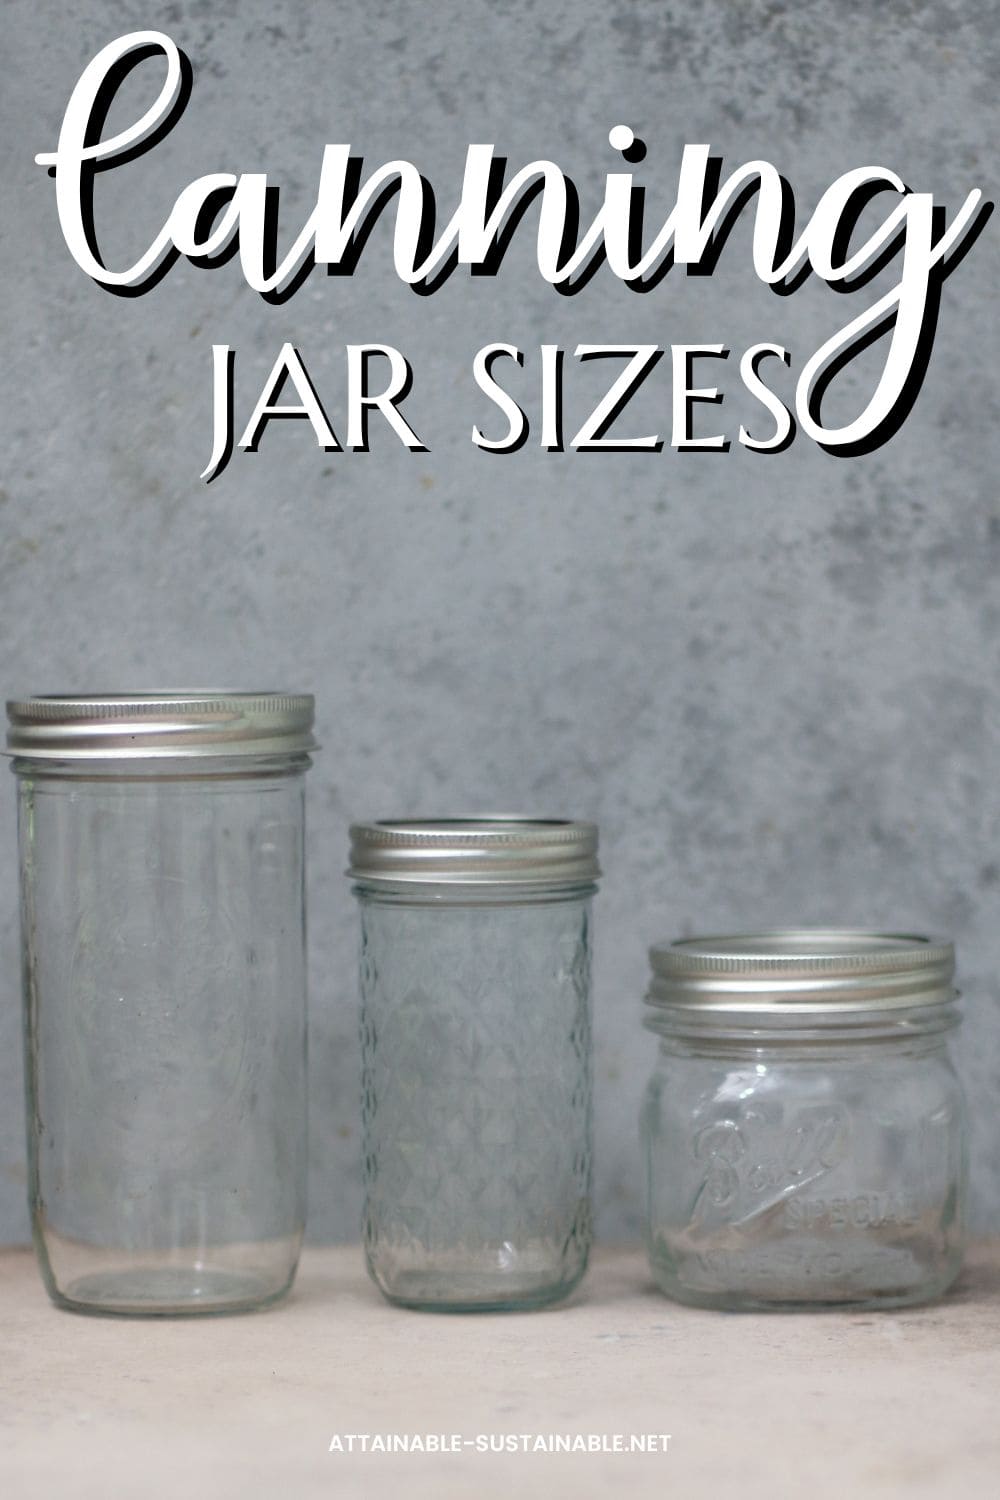 What Sizes Do Mason Jars Come In?